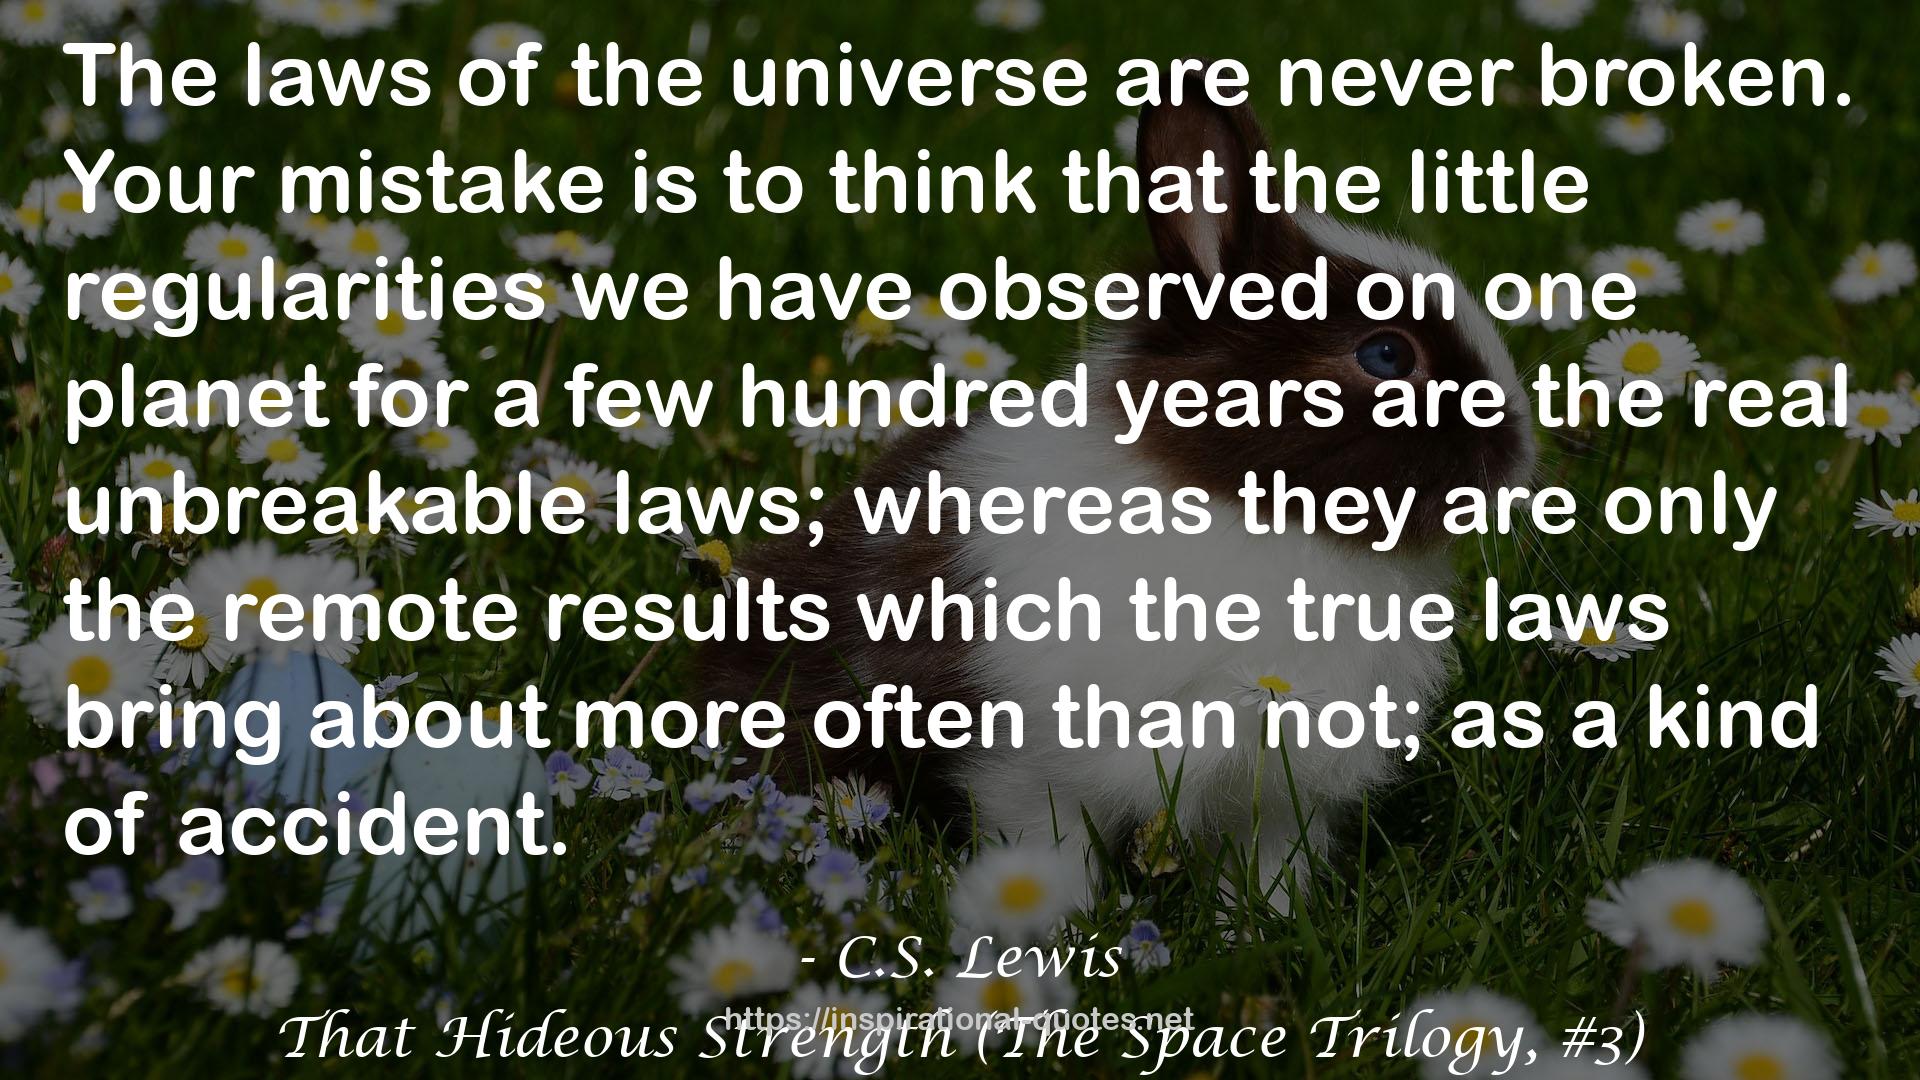 That Hideous Strength (The Space Trilogy, #3) QUOTES